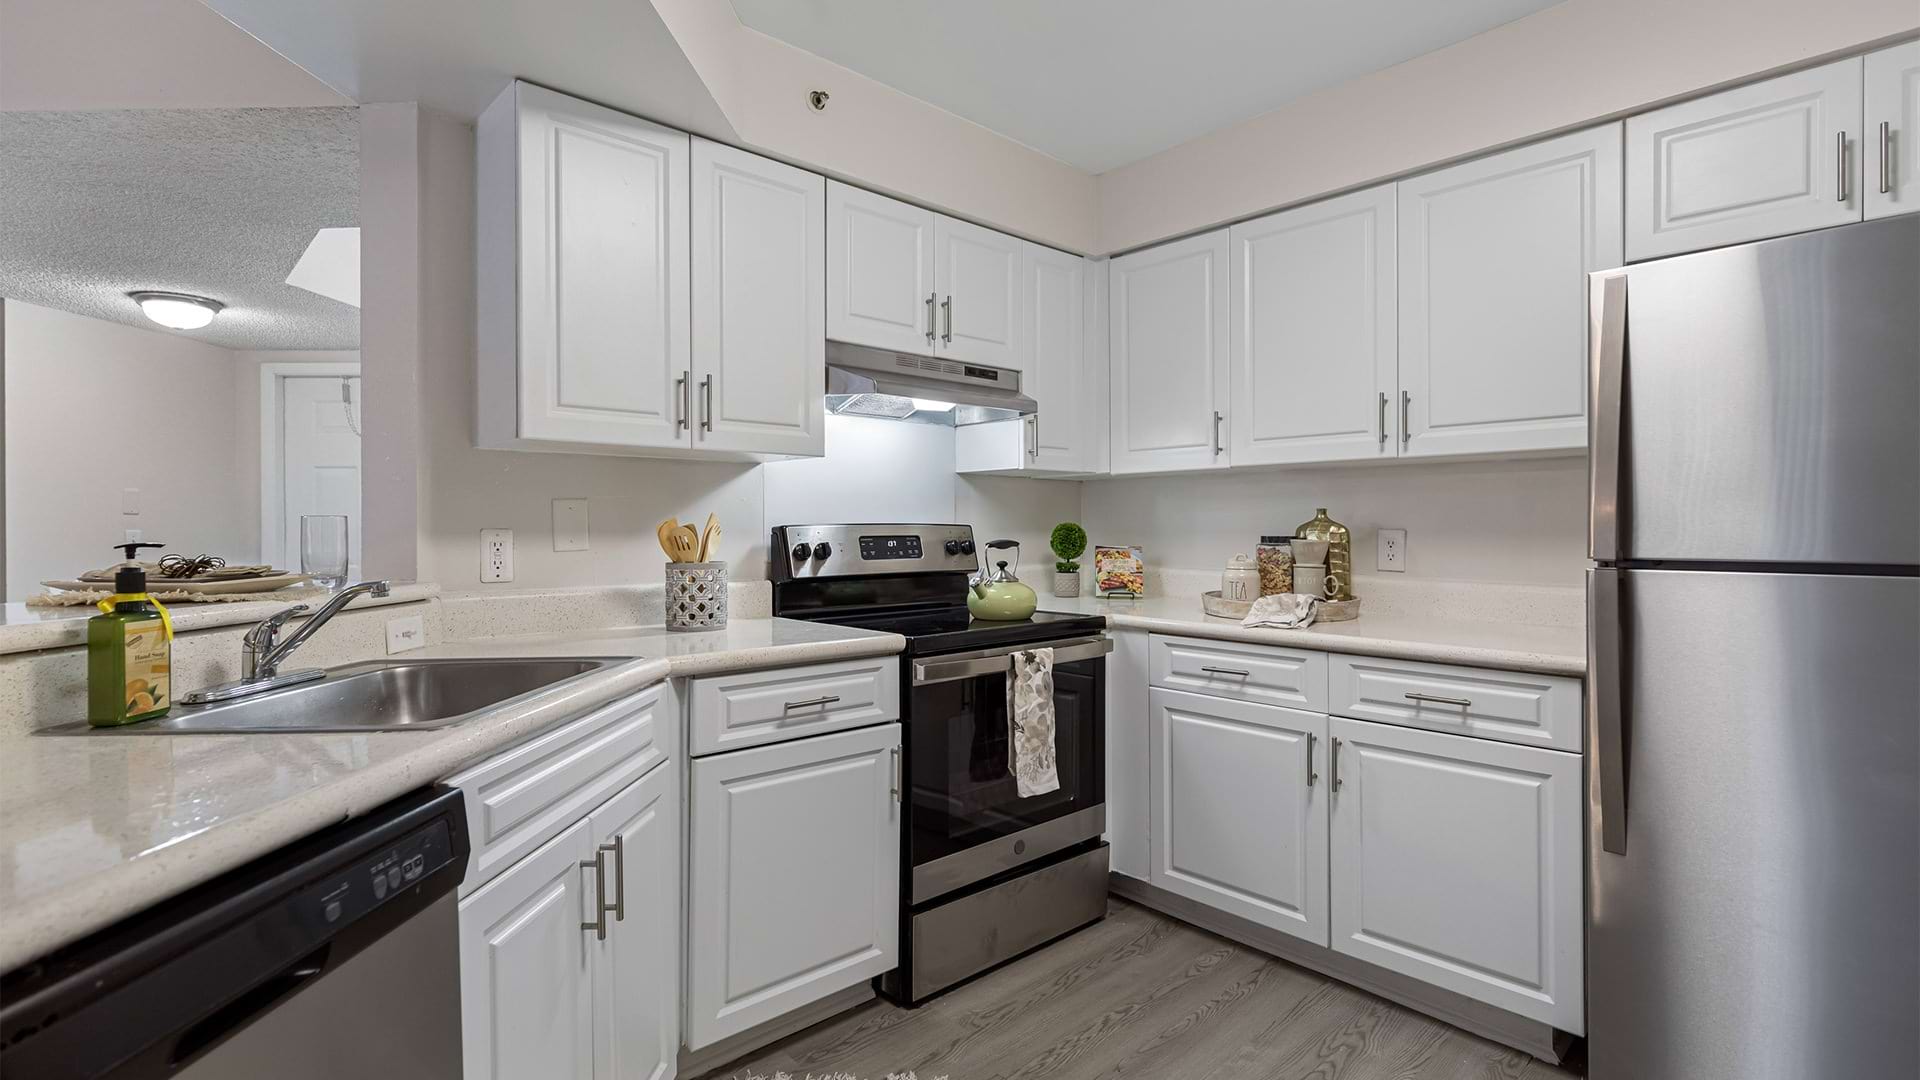 Our Miramar Apartments with Stainless Steel Appliances